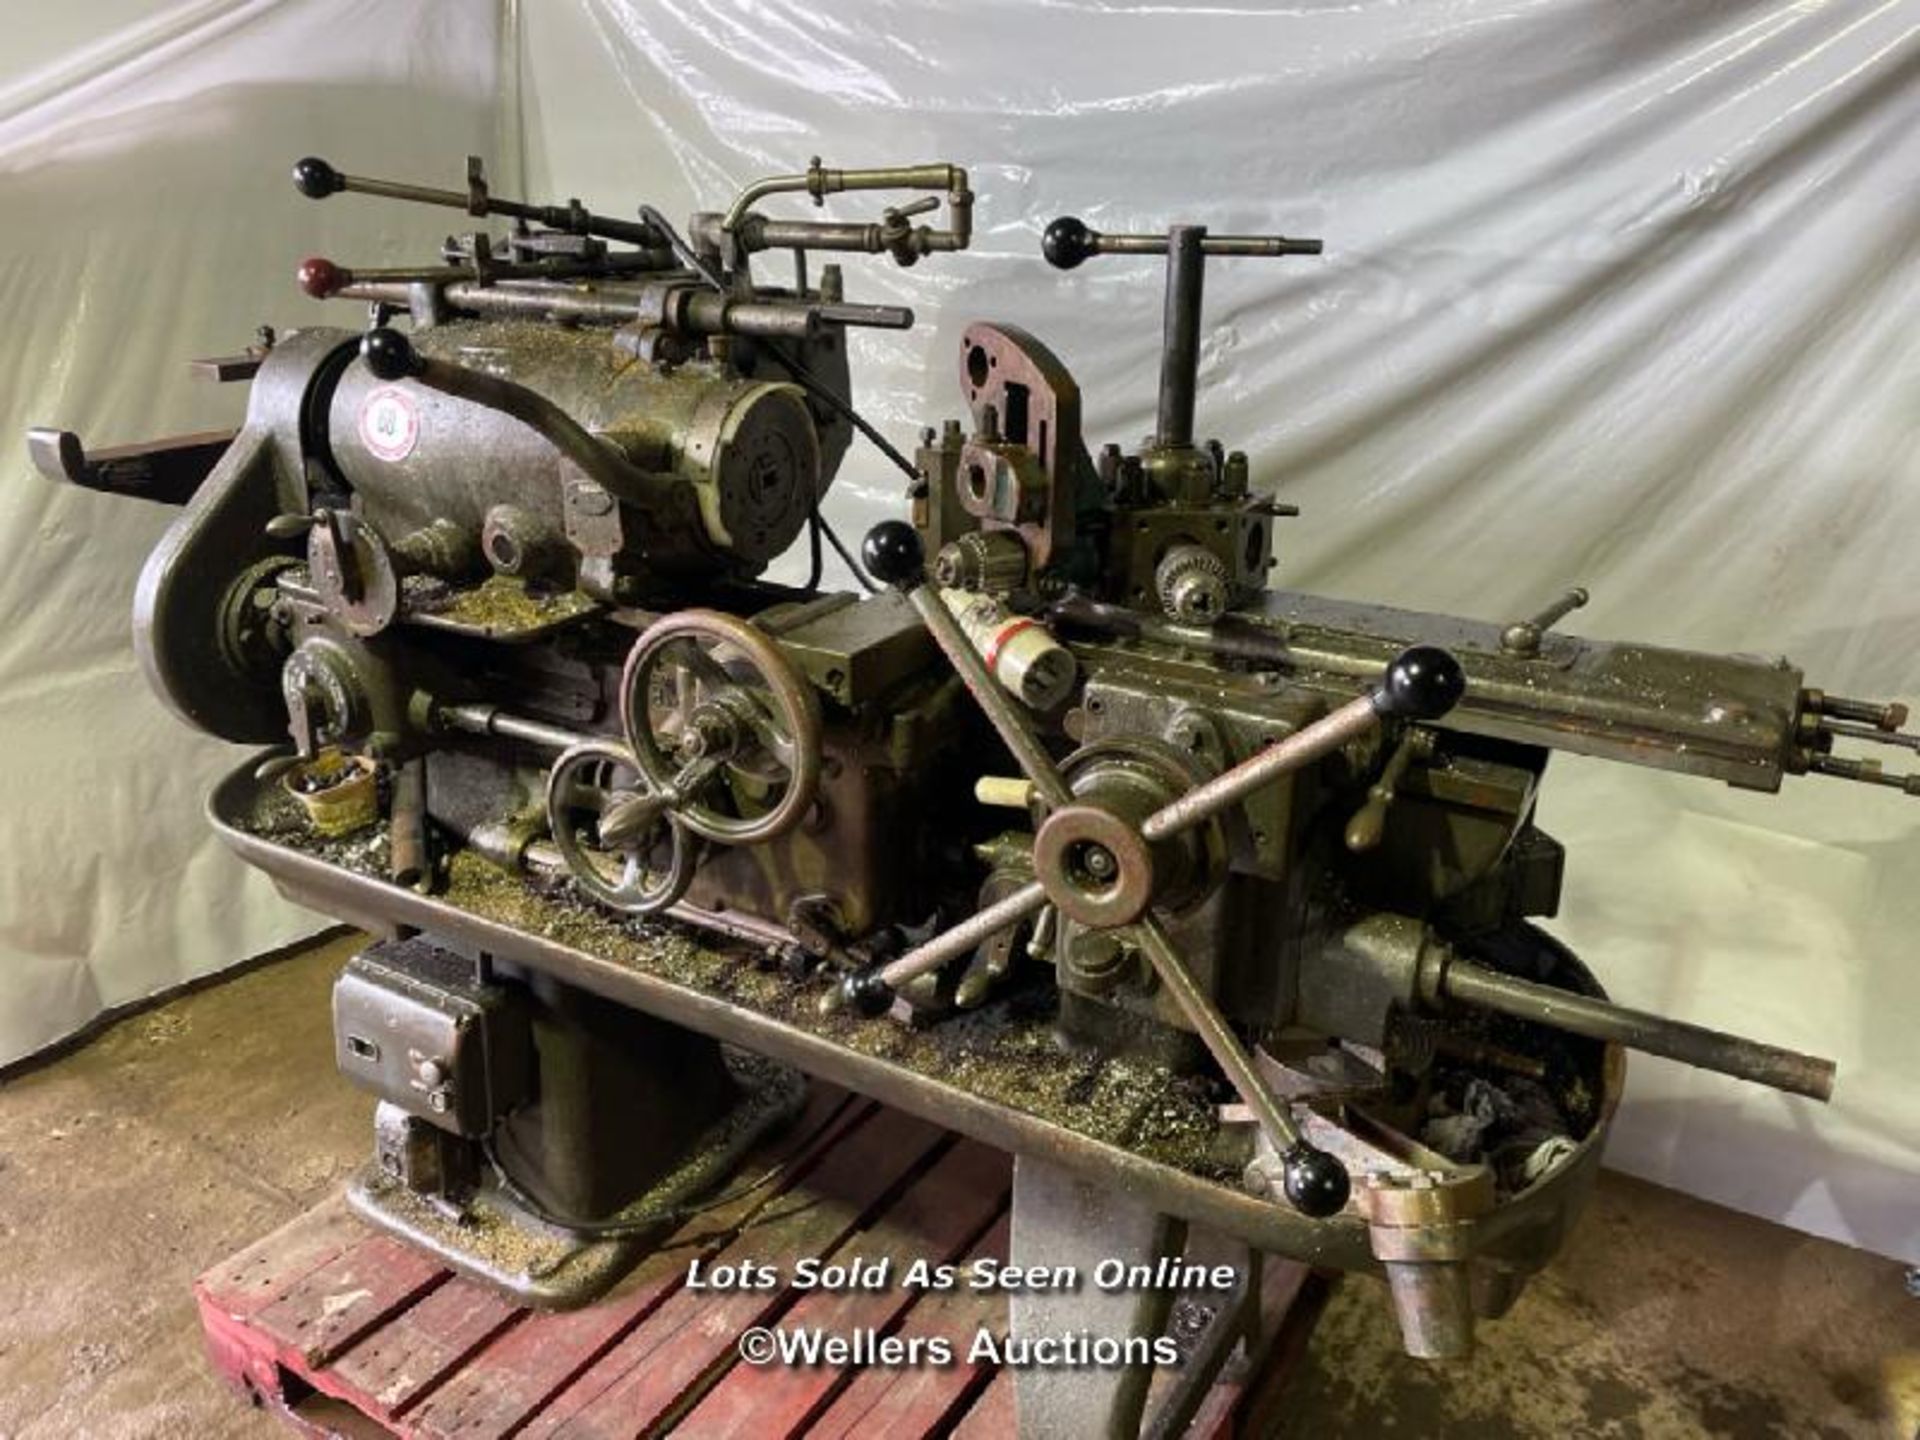 H. W. WARD AND SON CAPSTAN 2A LATHE, 3 PHASE, INCL. 3 JAW CHUCK, IN WORKING ORDER - Image 2 of 9